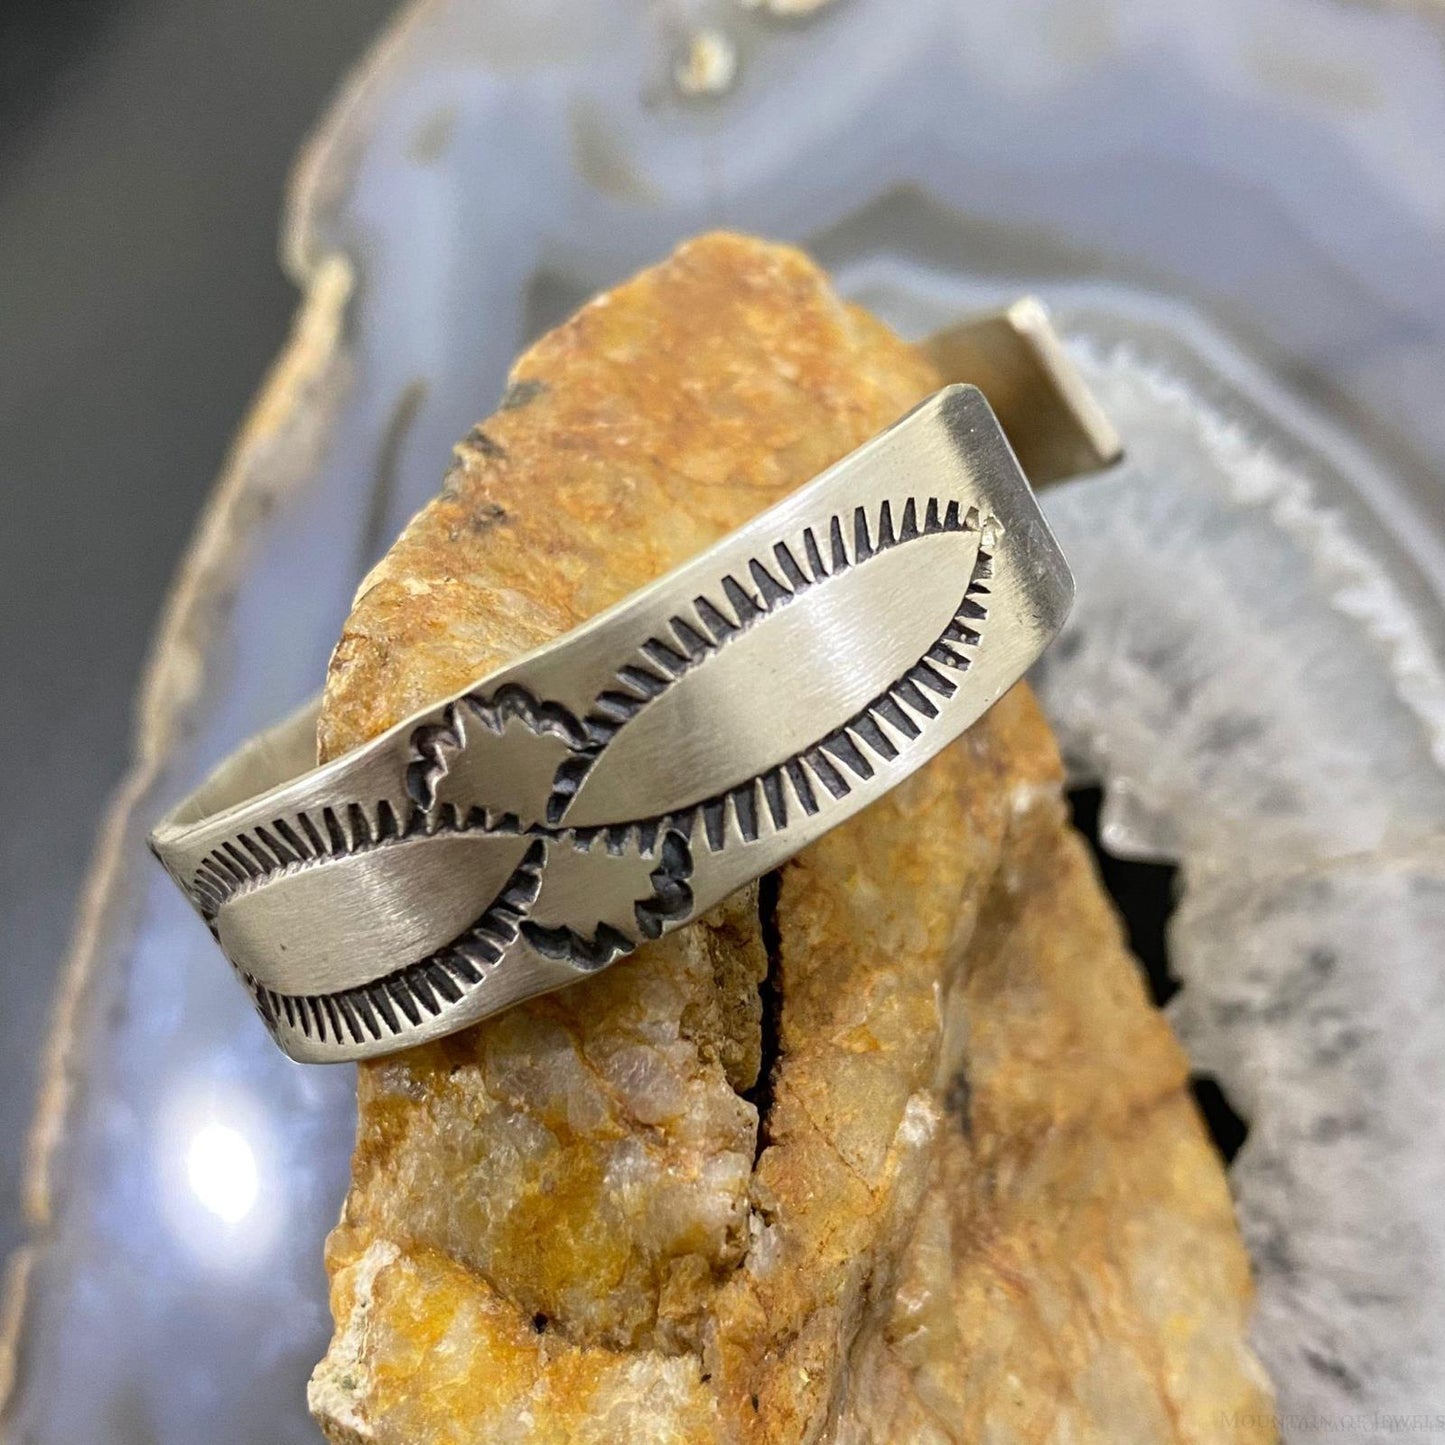 Native American Sterling Silver Stamped Stackable Cuff Bracelet For Men